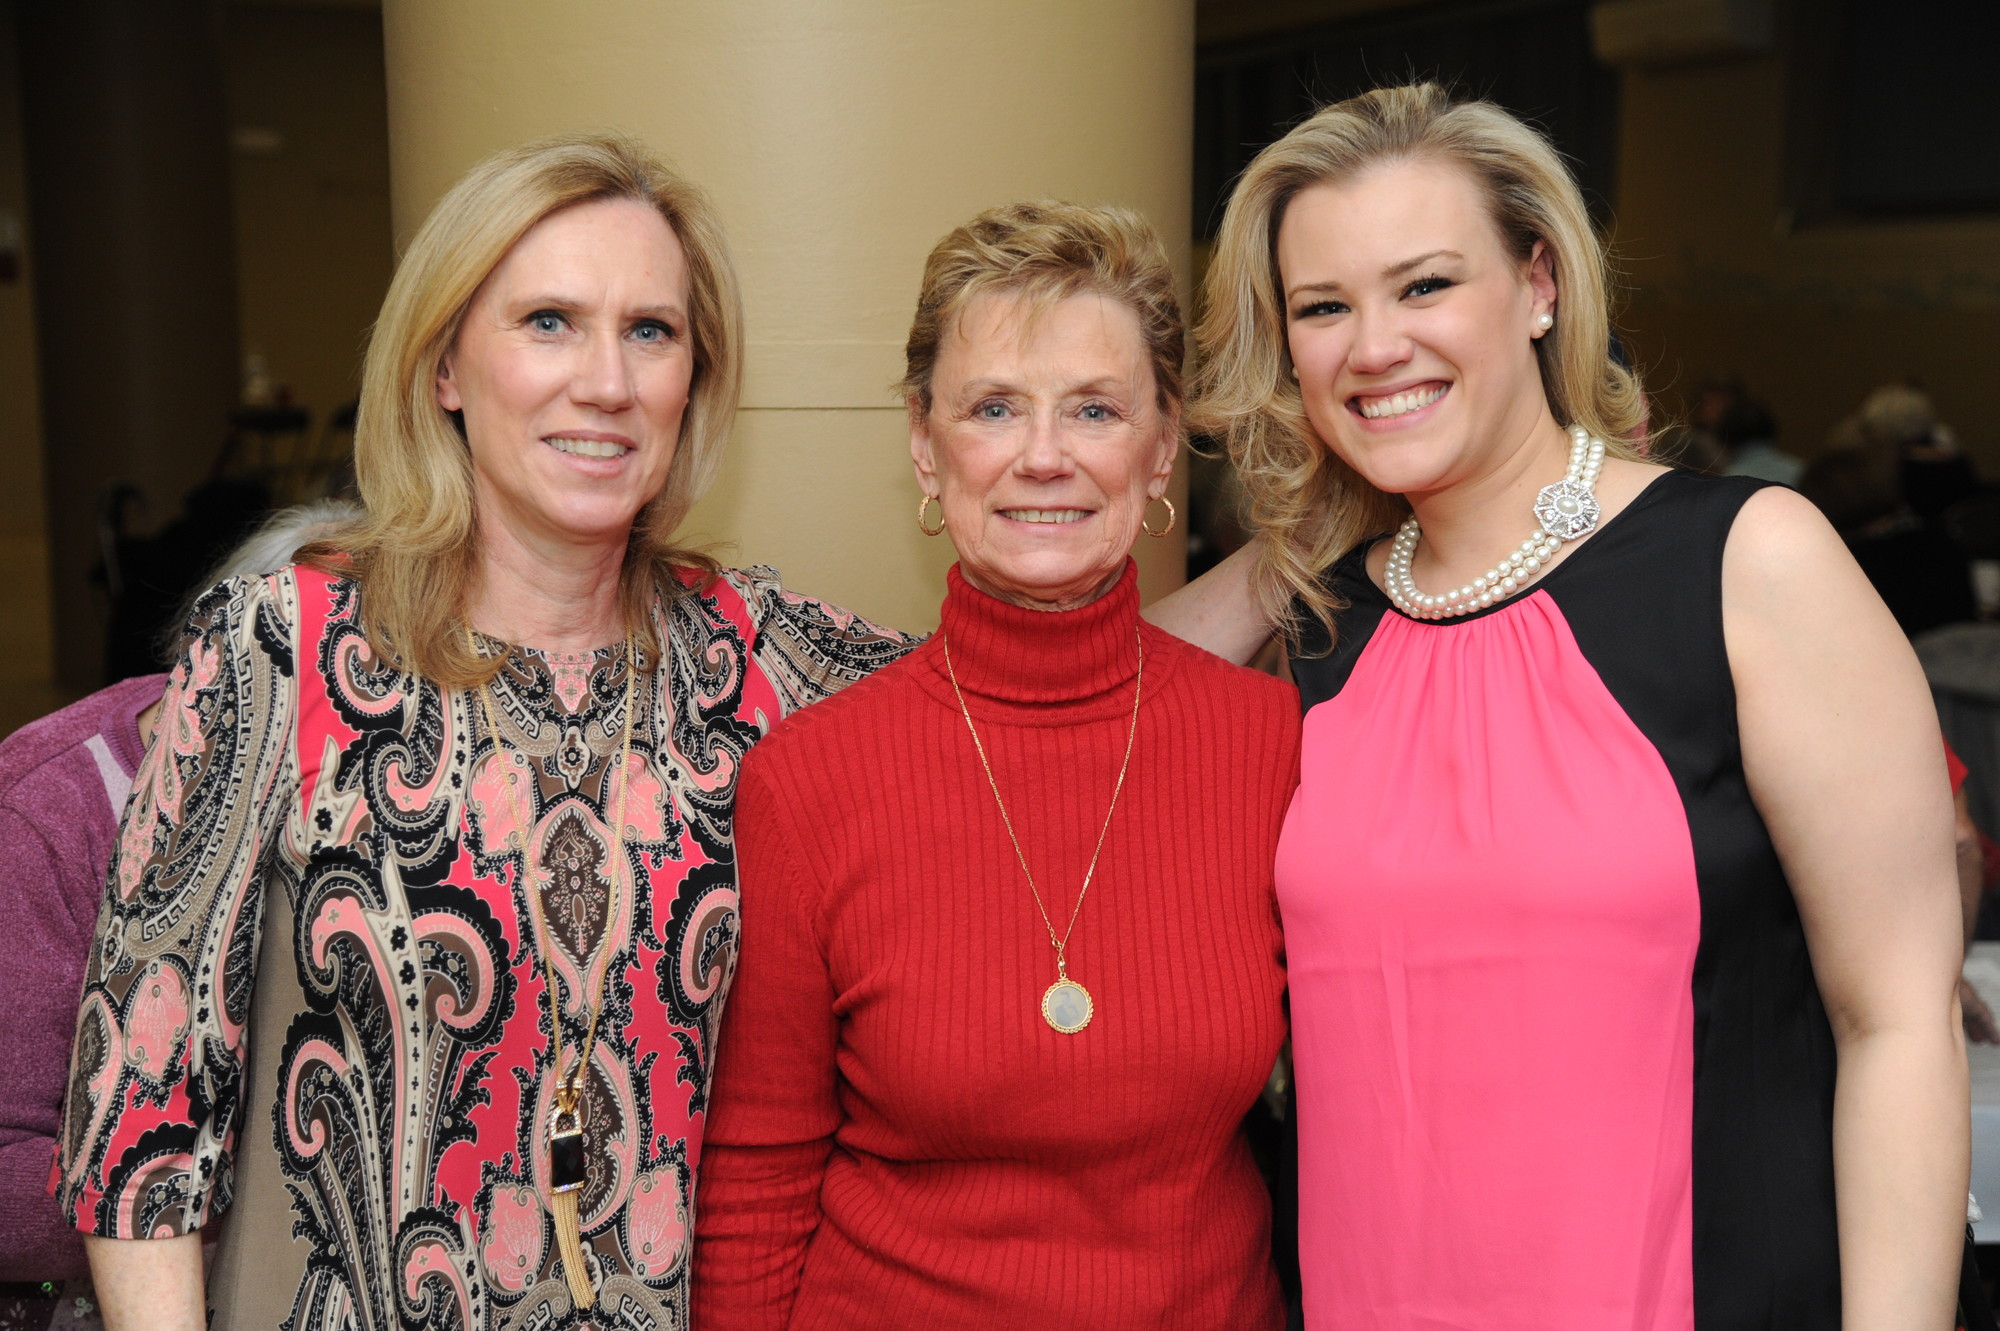 Three generations of St. Raphael’s parishioners — Diane Groth, left, Veronica Vitky O’Donnell and Danielle Groth.